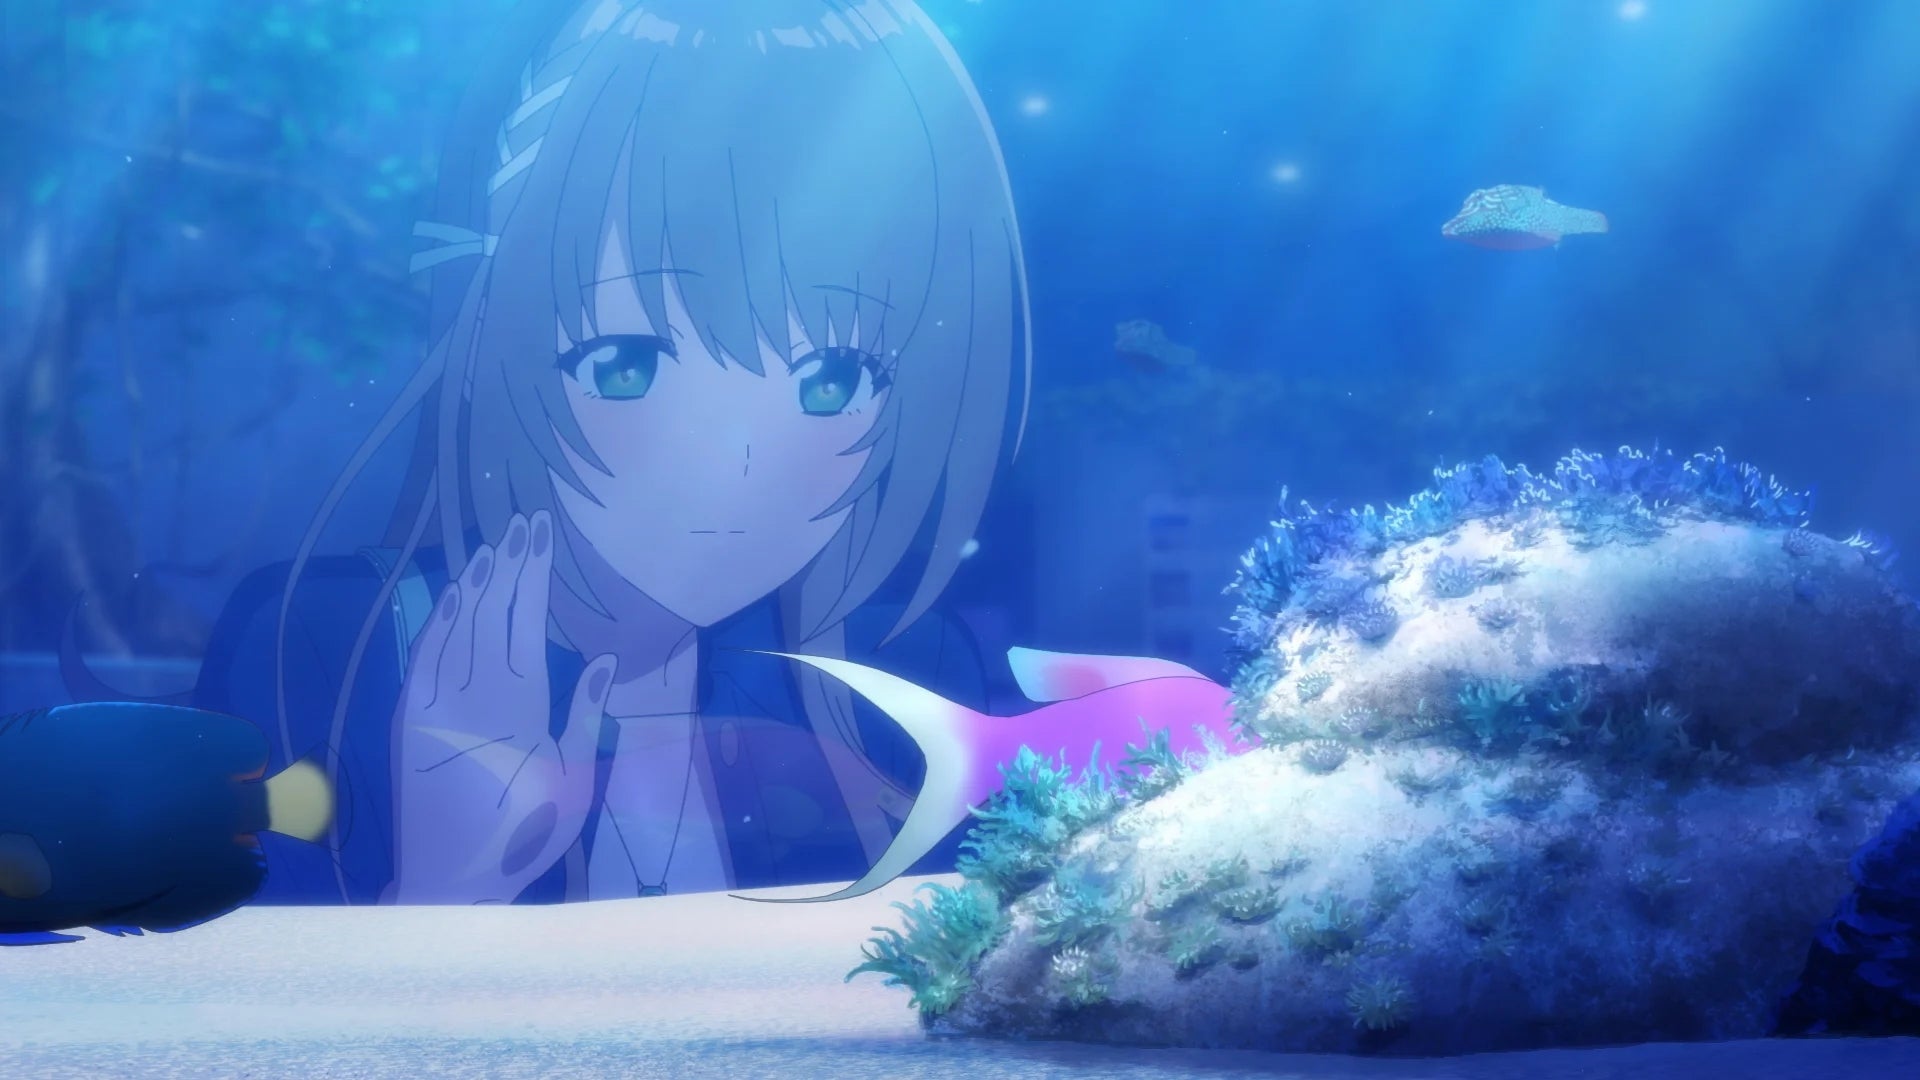 New Trailer for Aquatope of White Sand Anime!